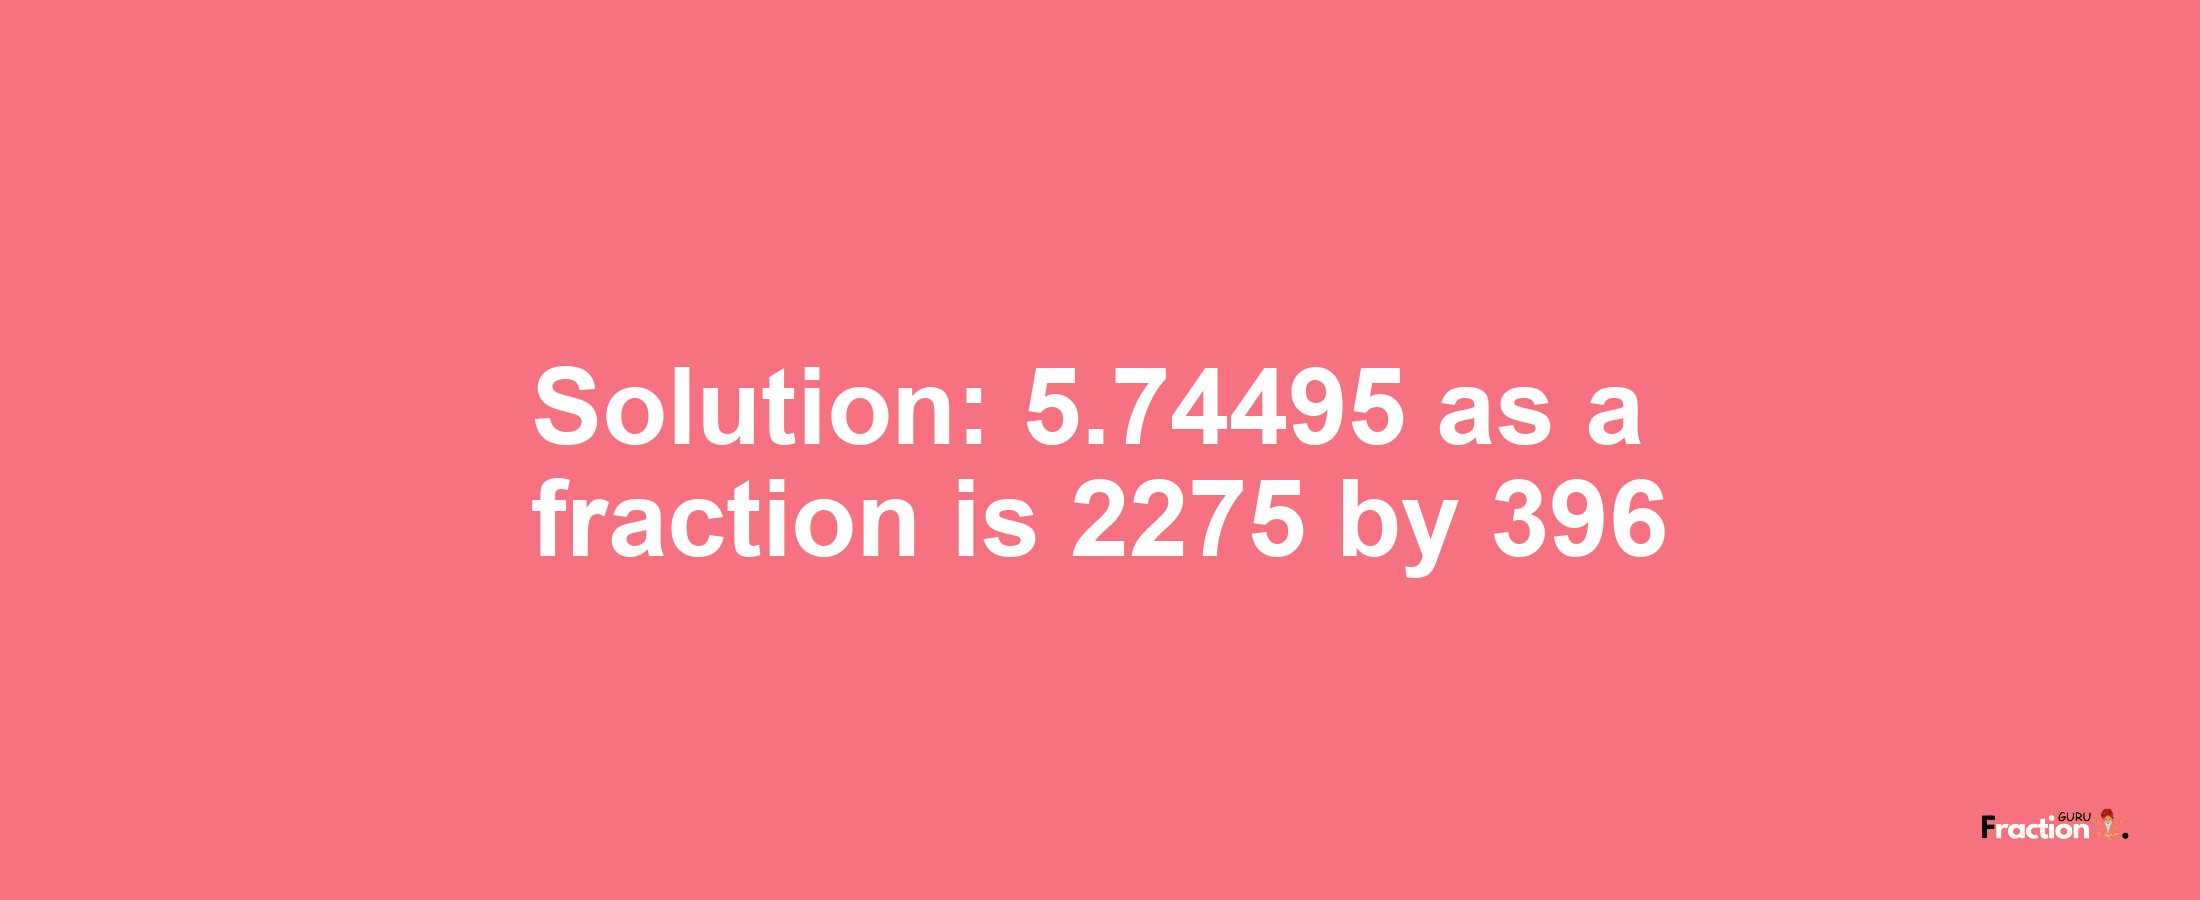 Solution:5.74495 as a fraction is 2275/396